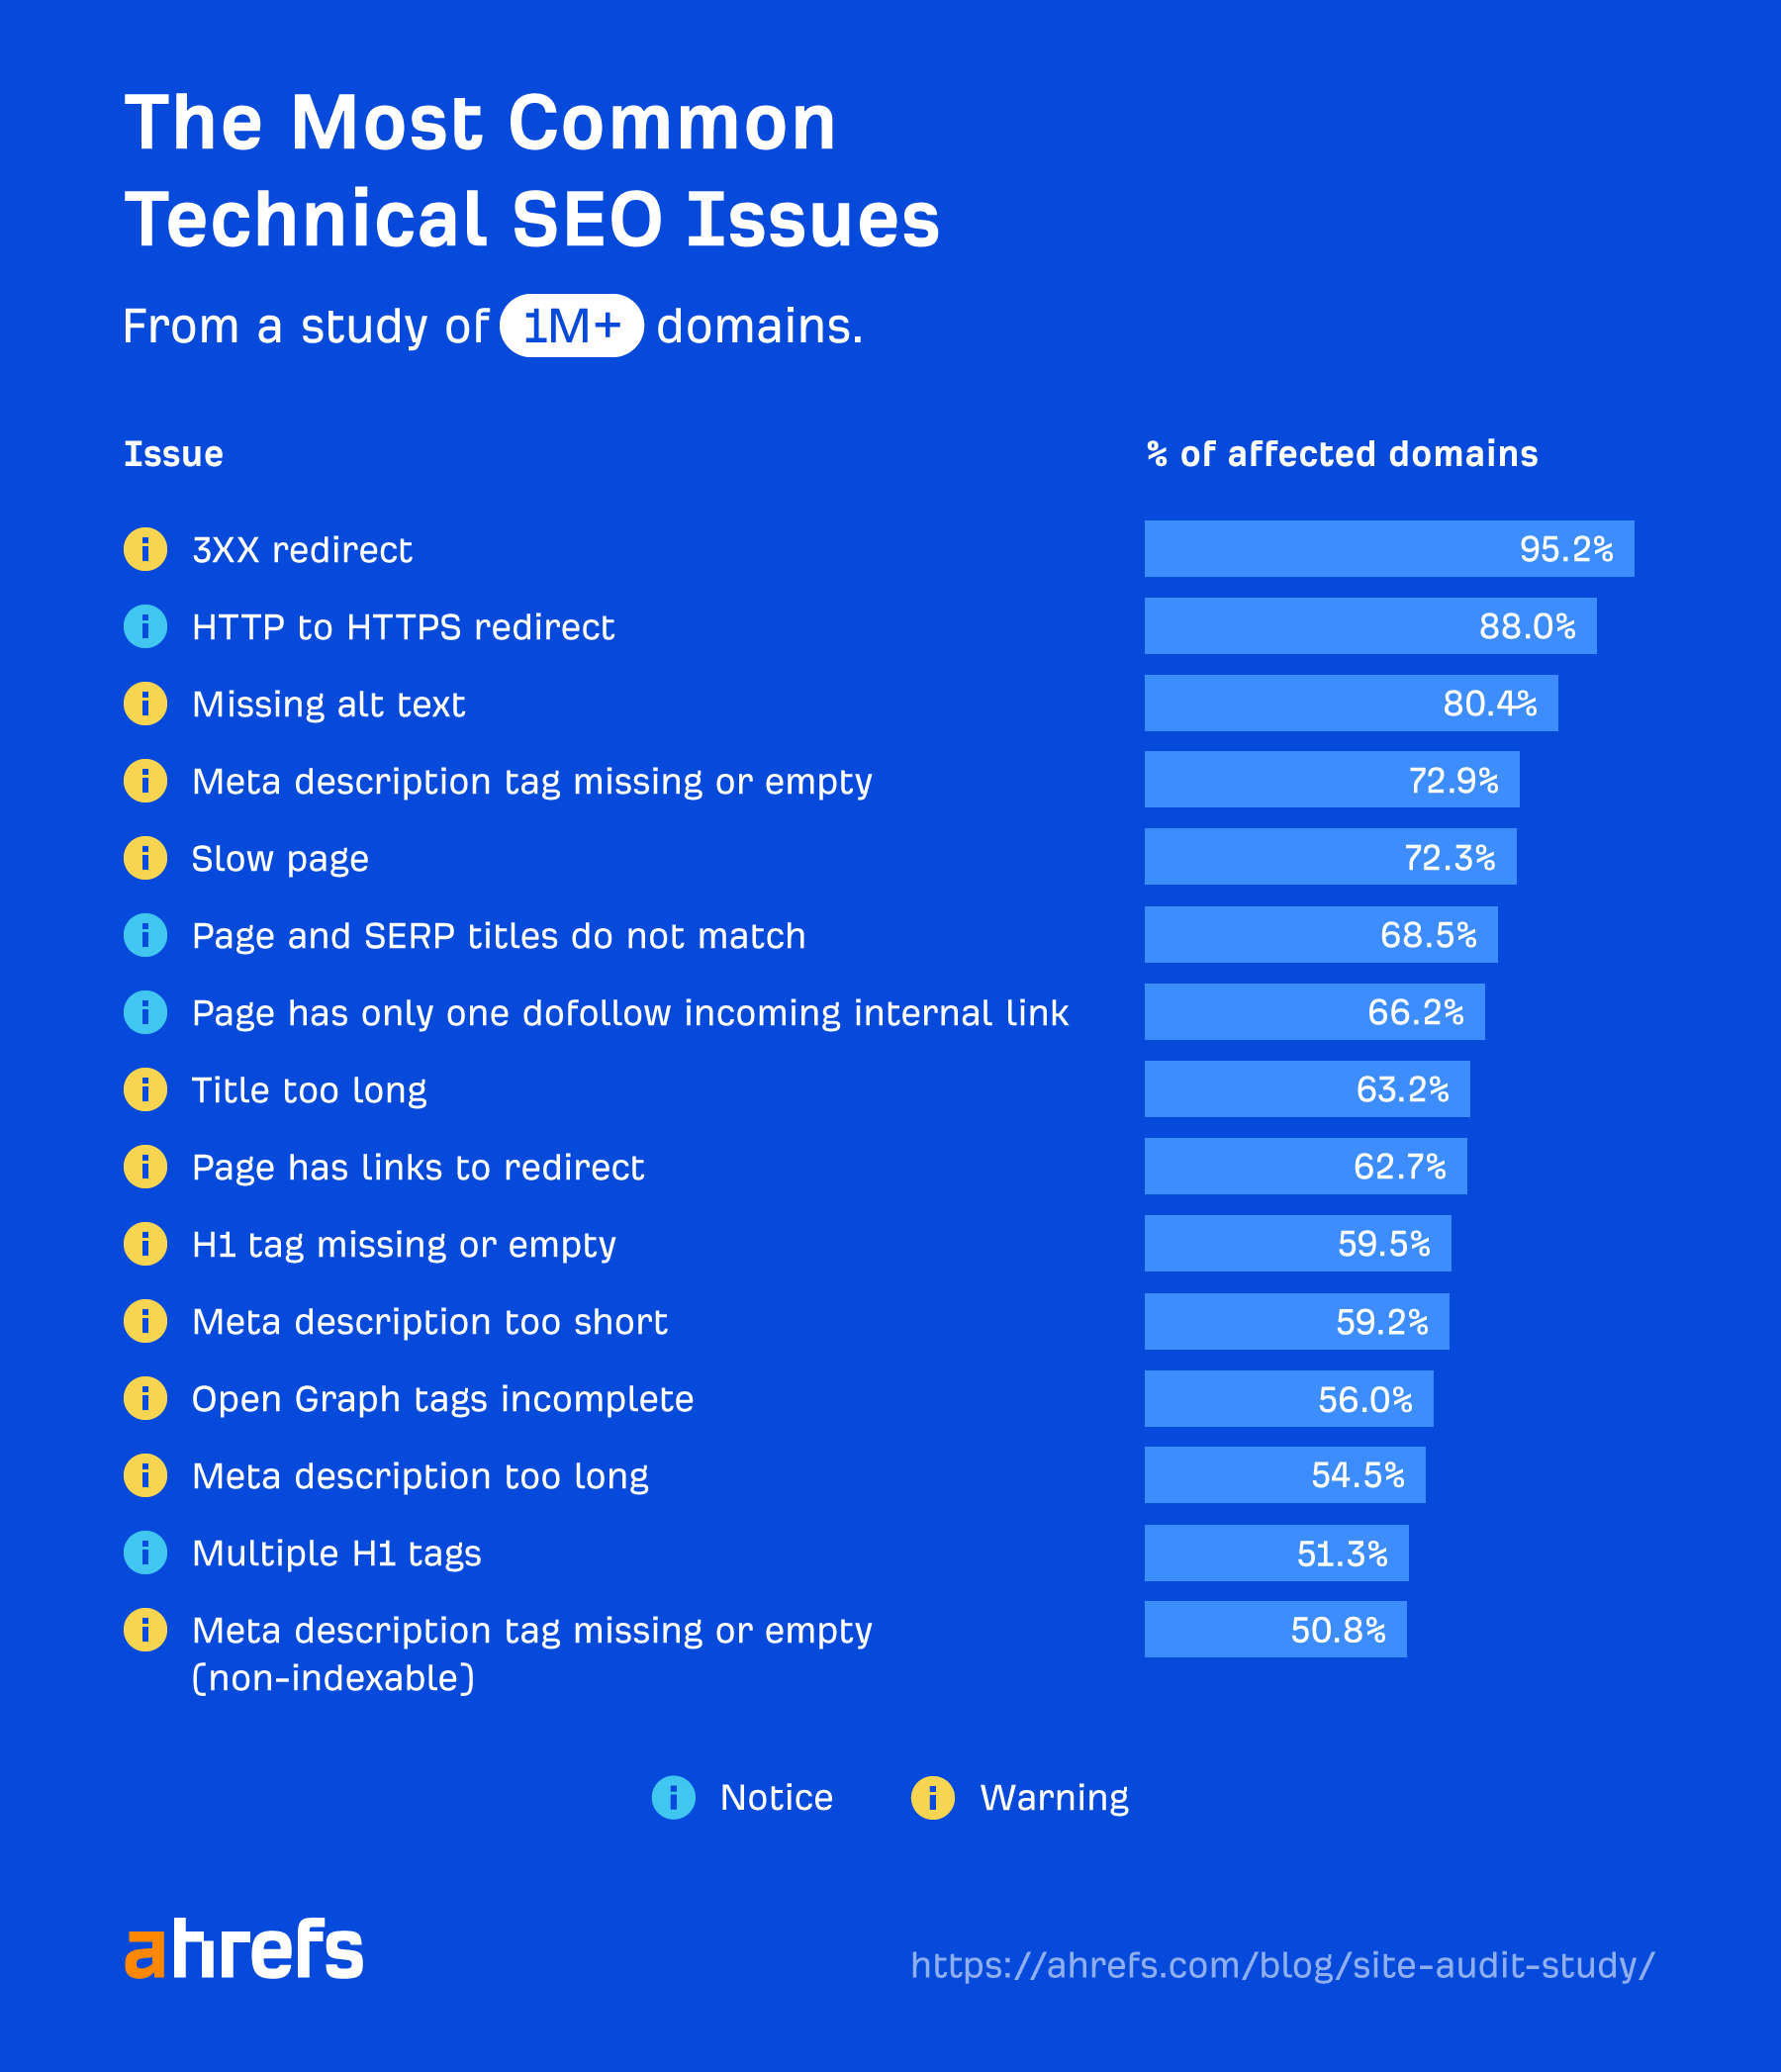 The most common technical SEO issues from a study of over 1 million domains